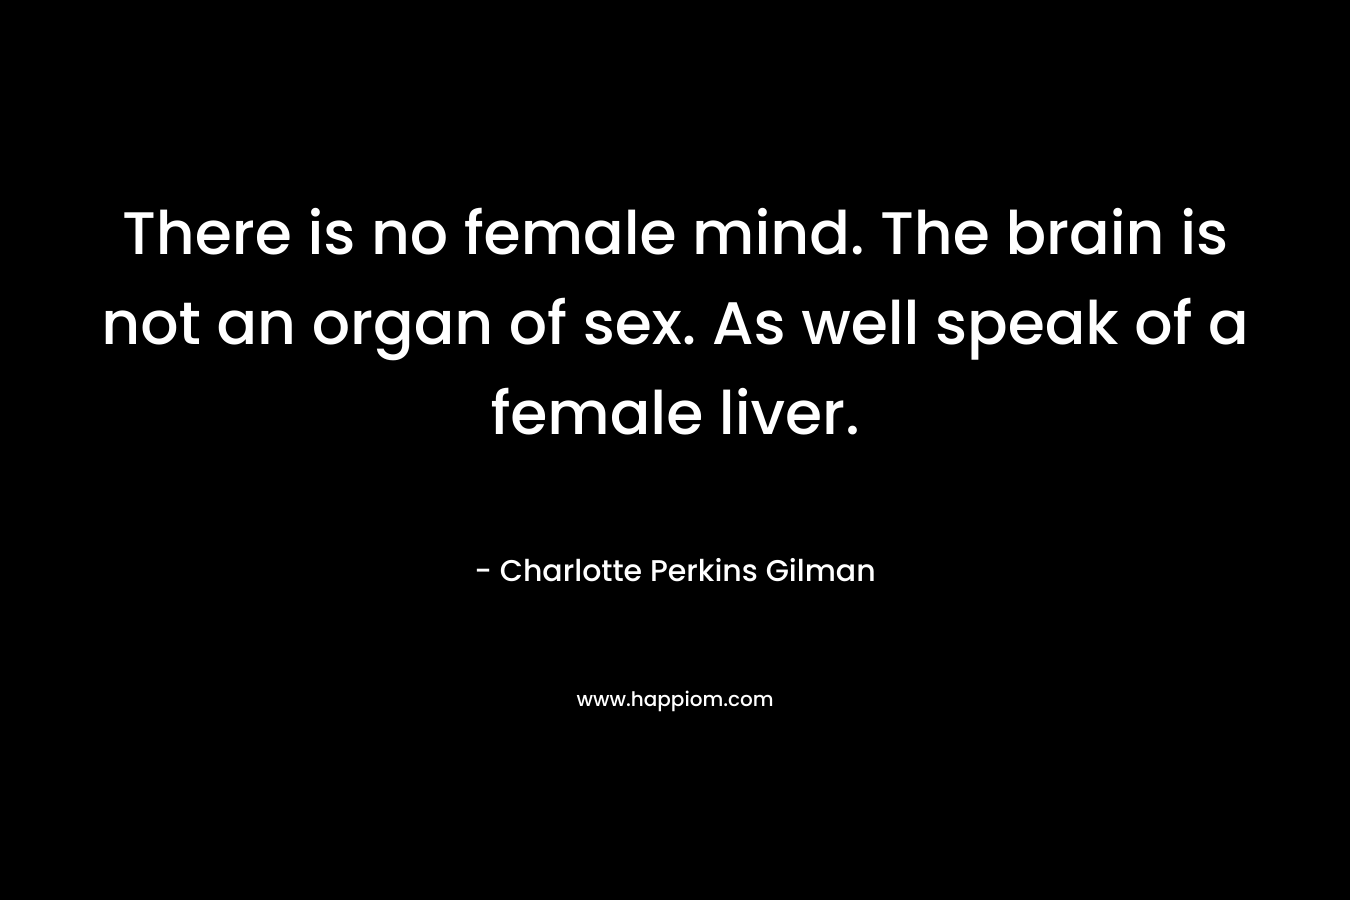 There is no female mind. The brain is not an organ of sex. As well speak of a female liver.